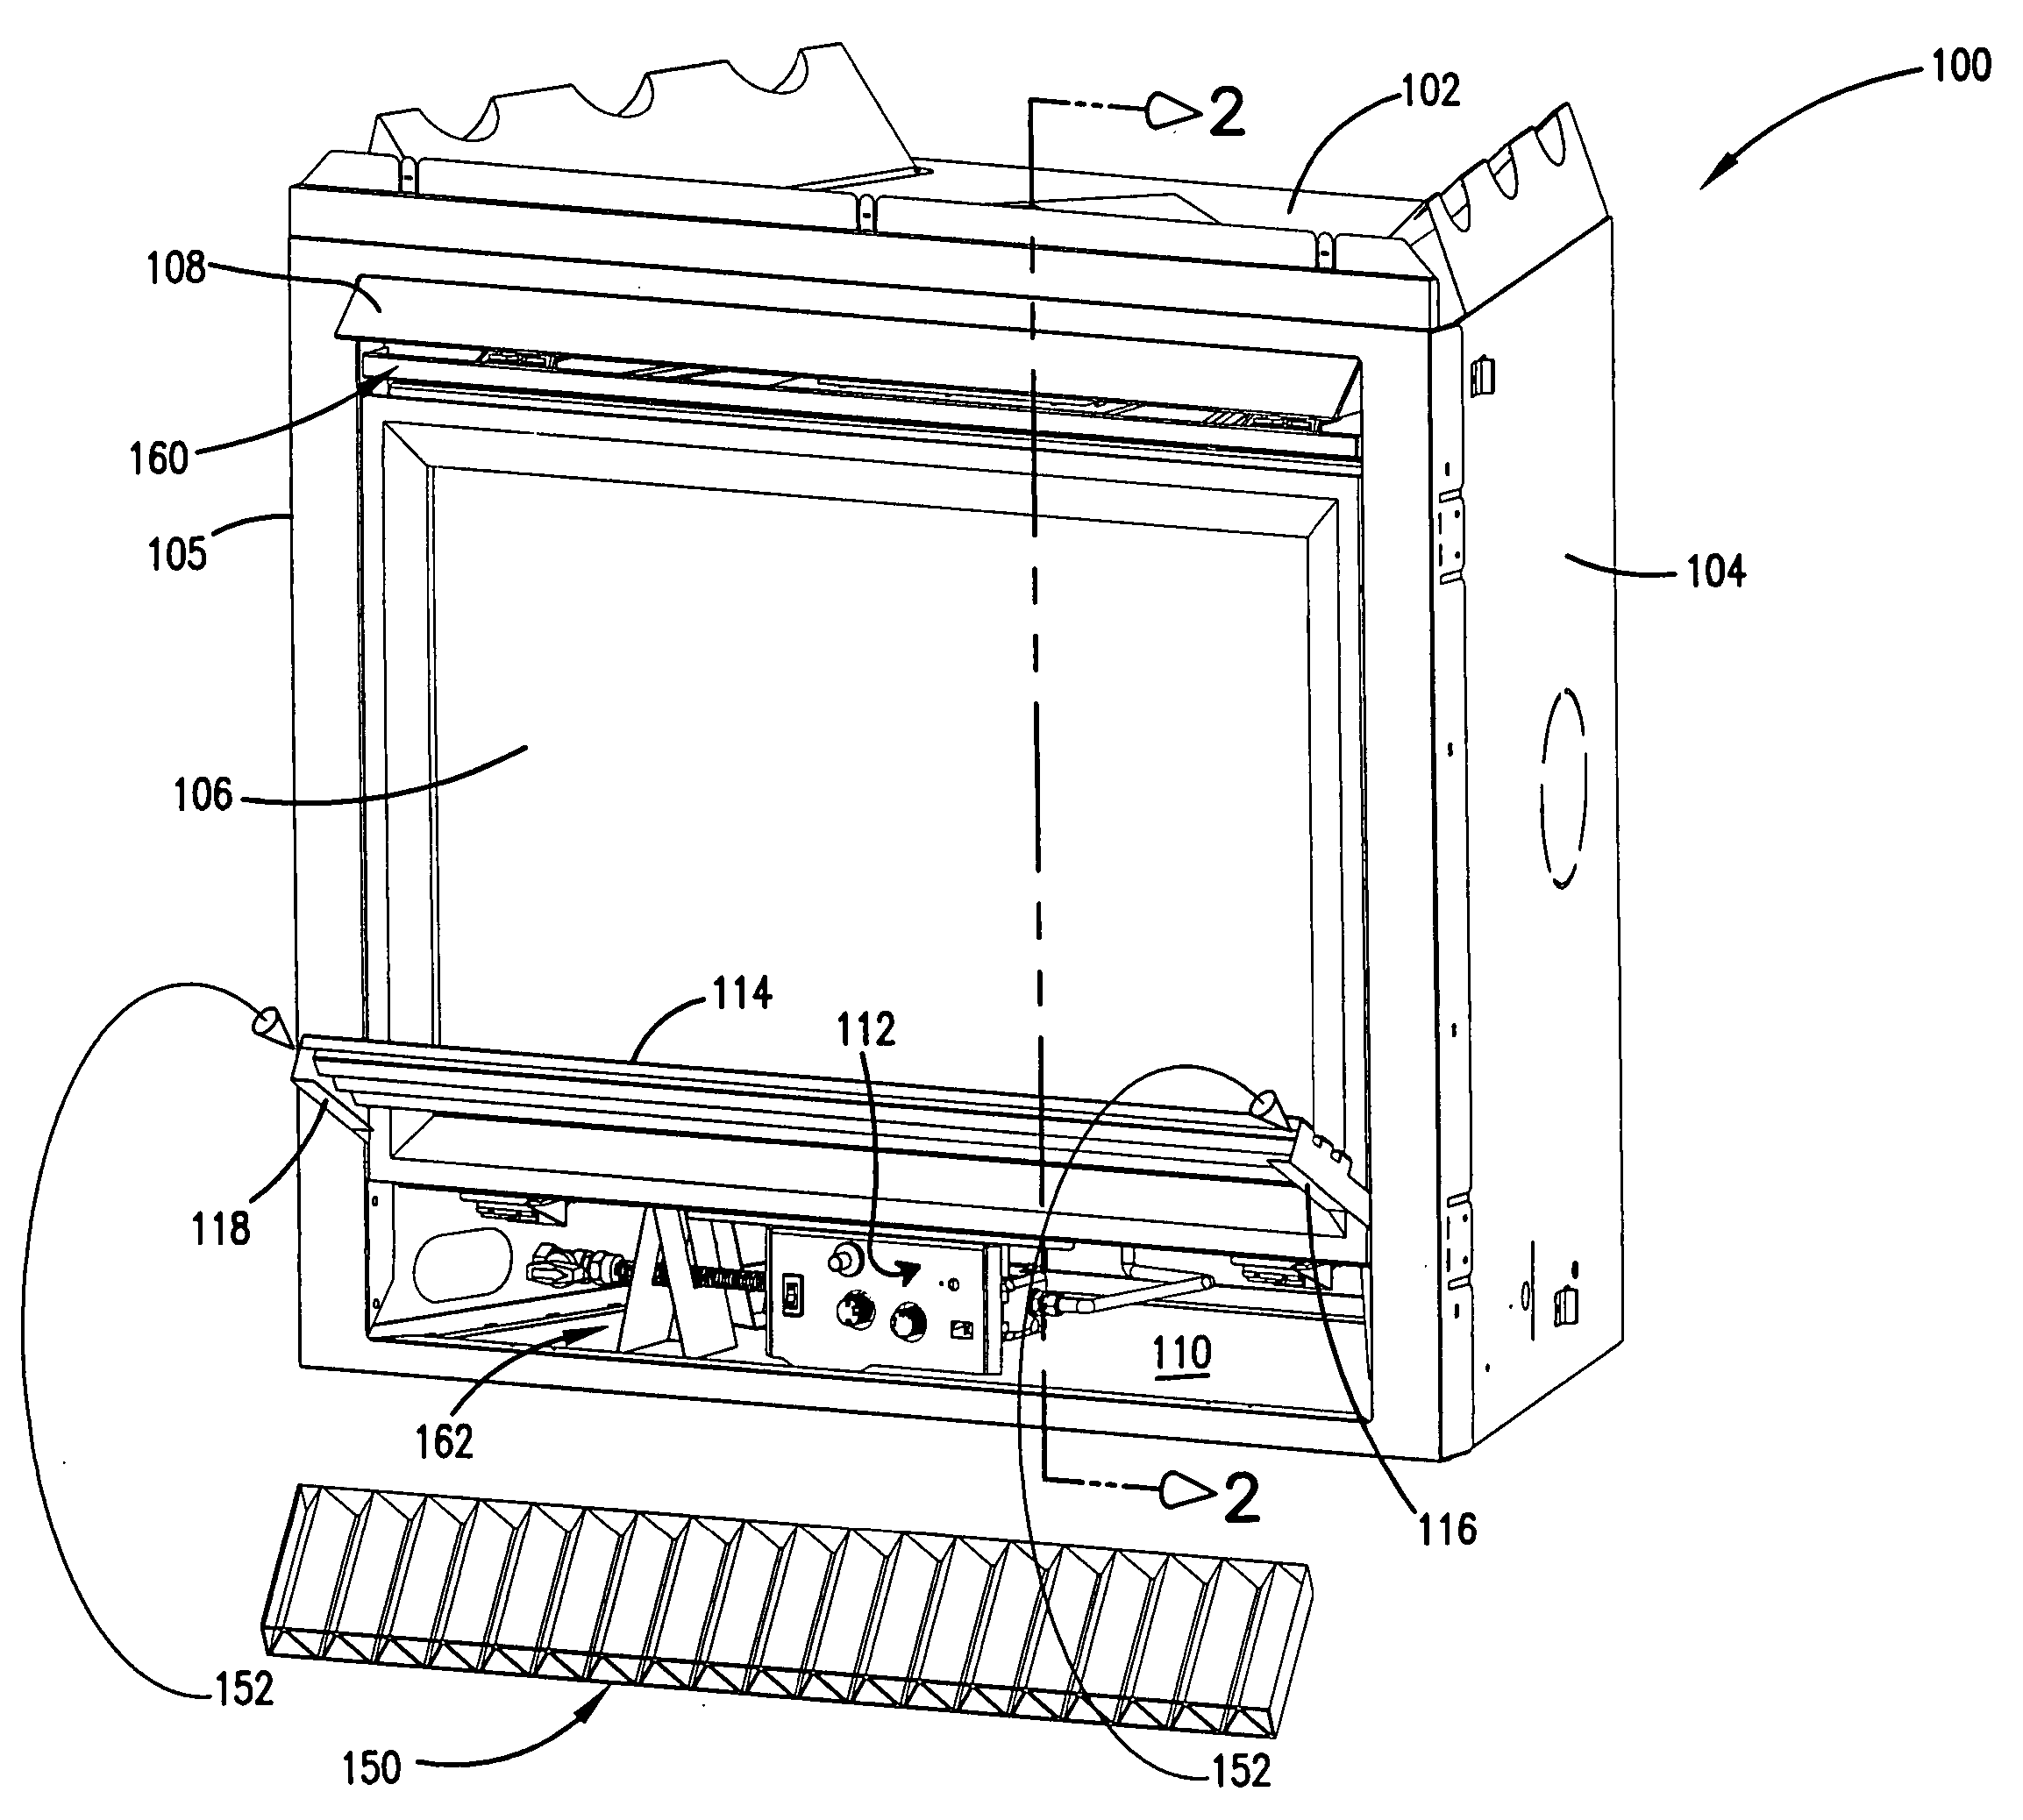 Air filtration and sterilization system for a fireplace